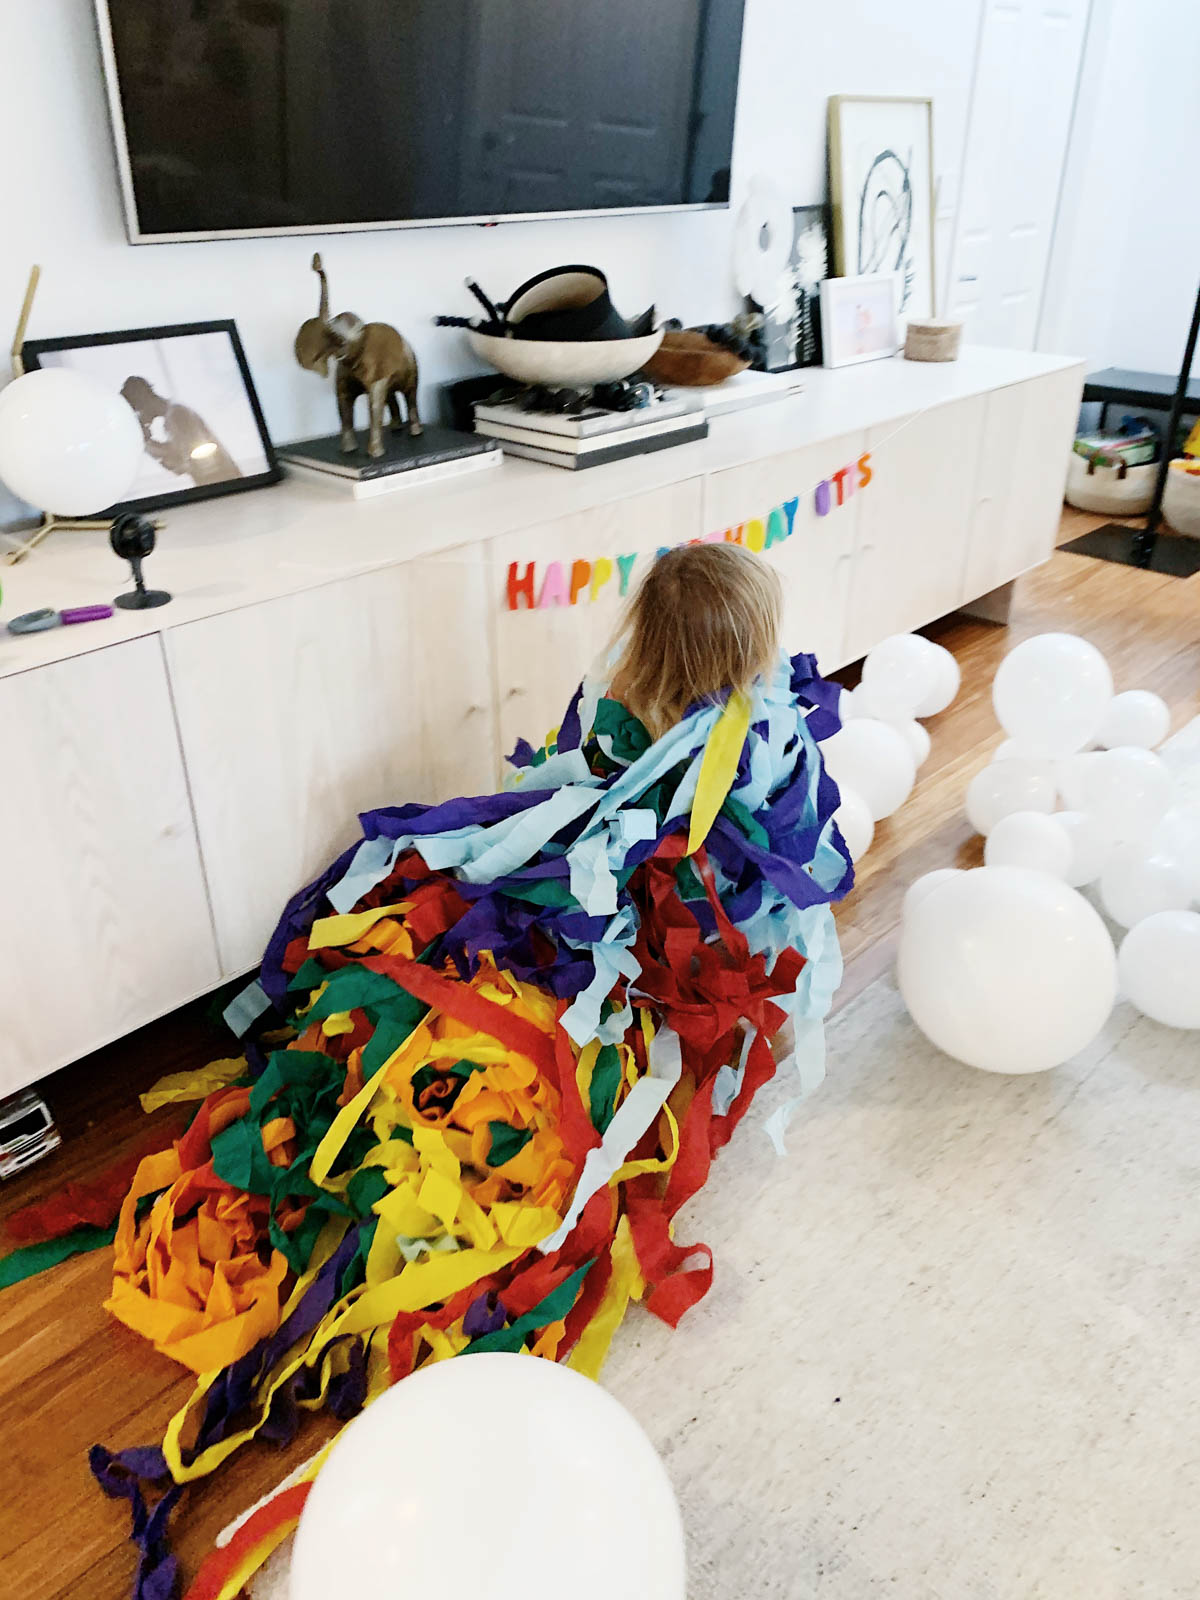 Toddler running with streamers from Trolls theme birthday